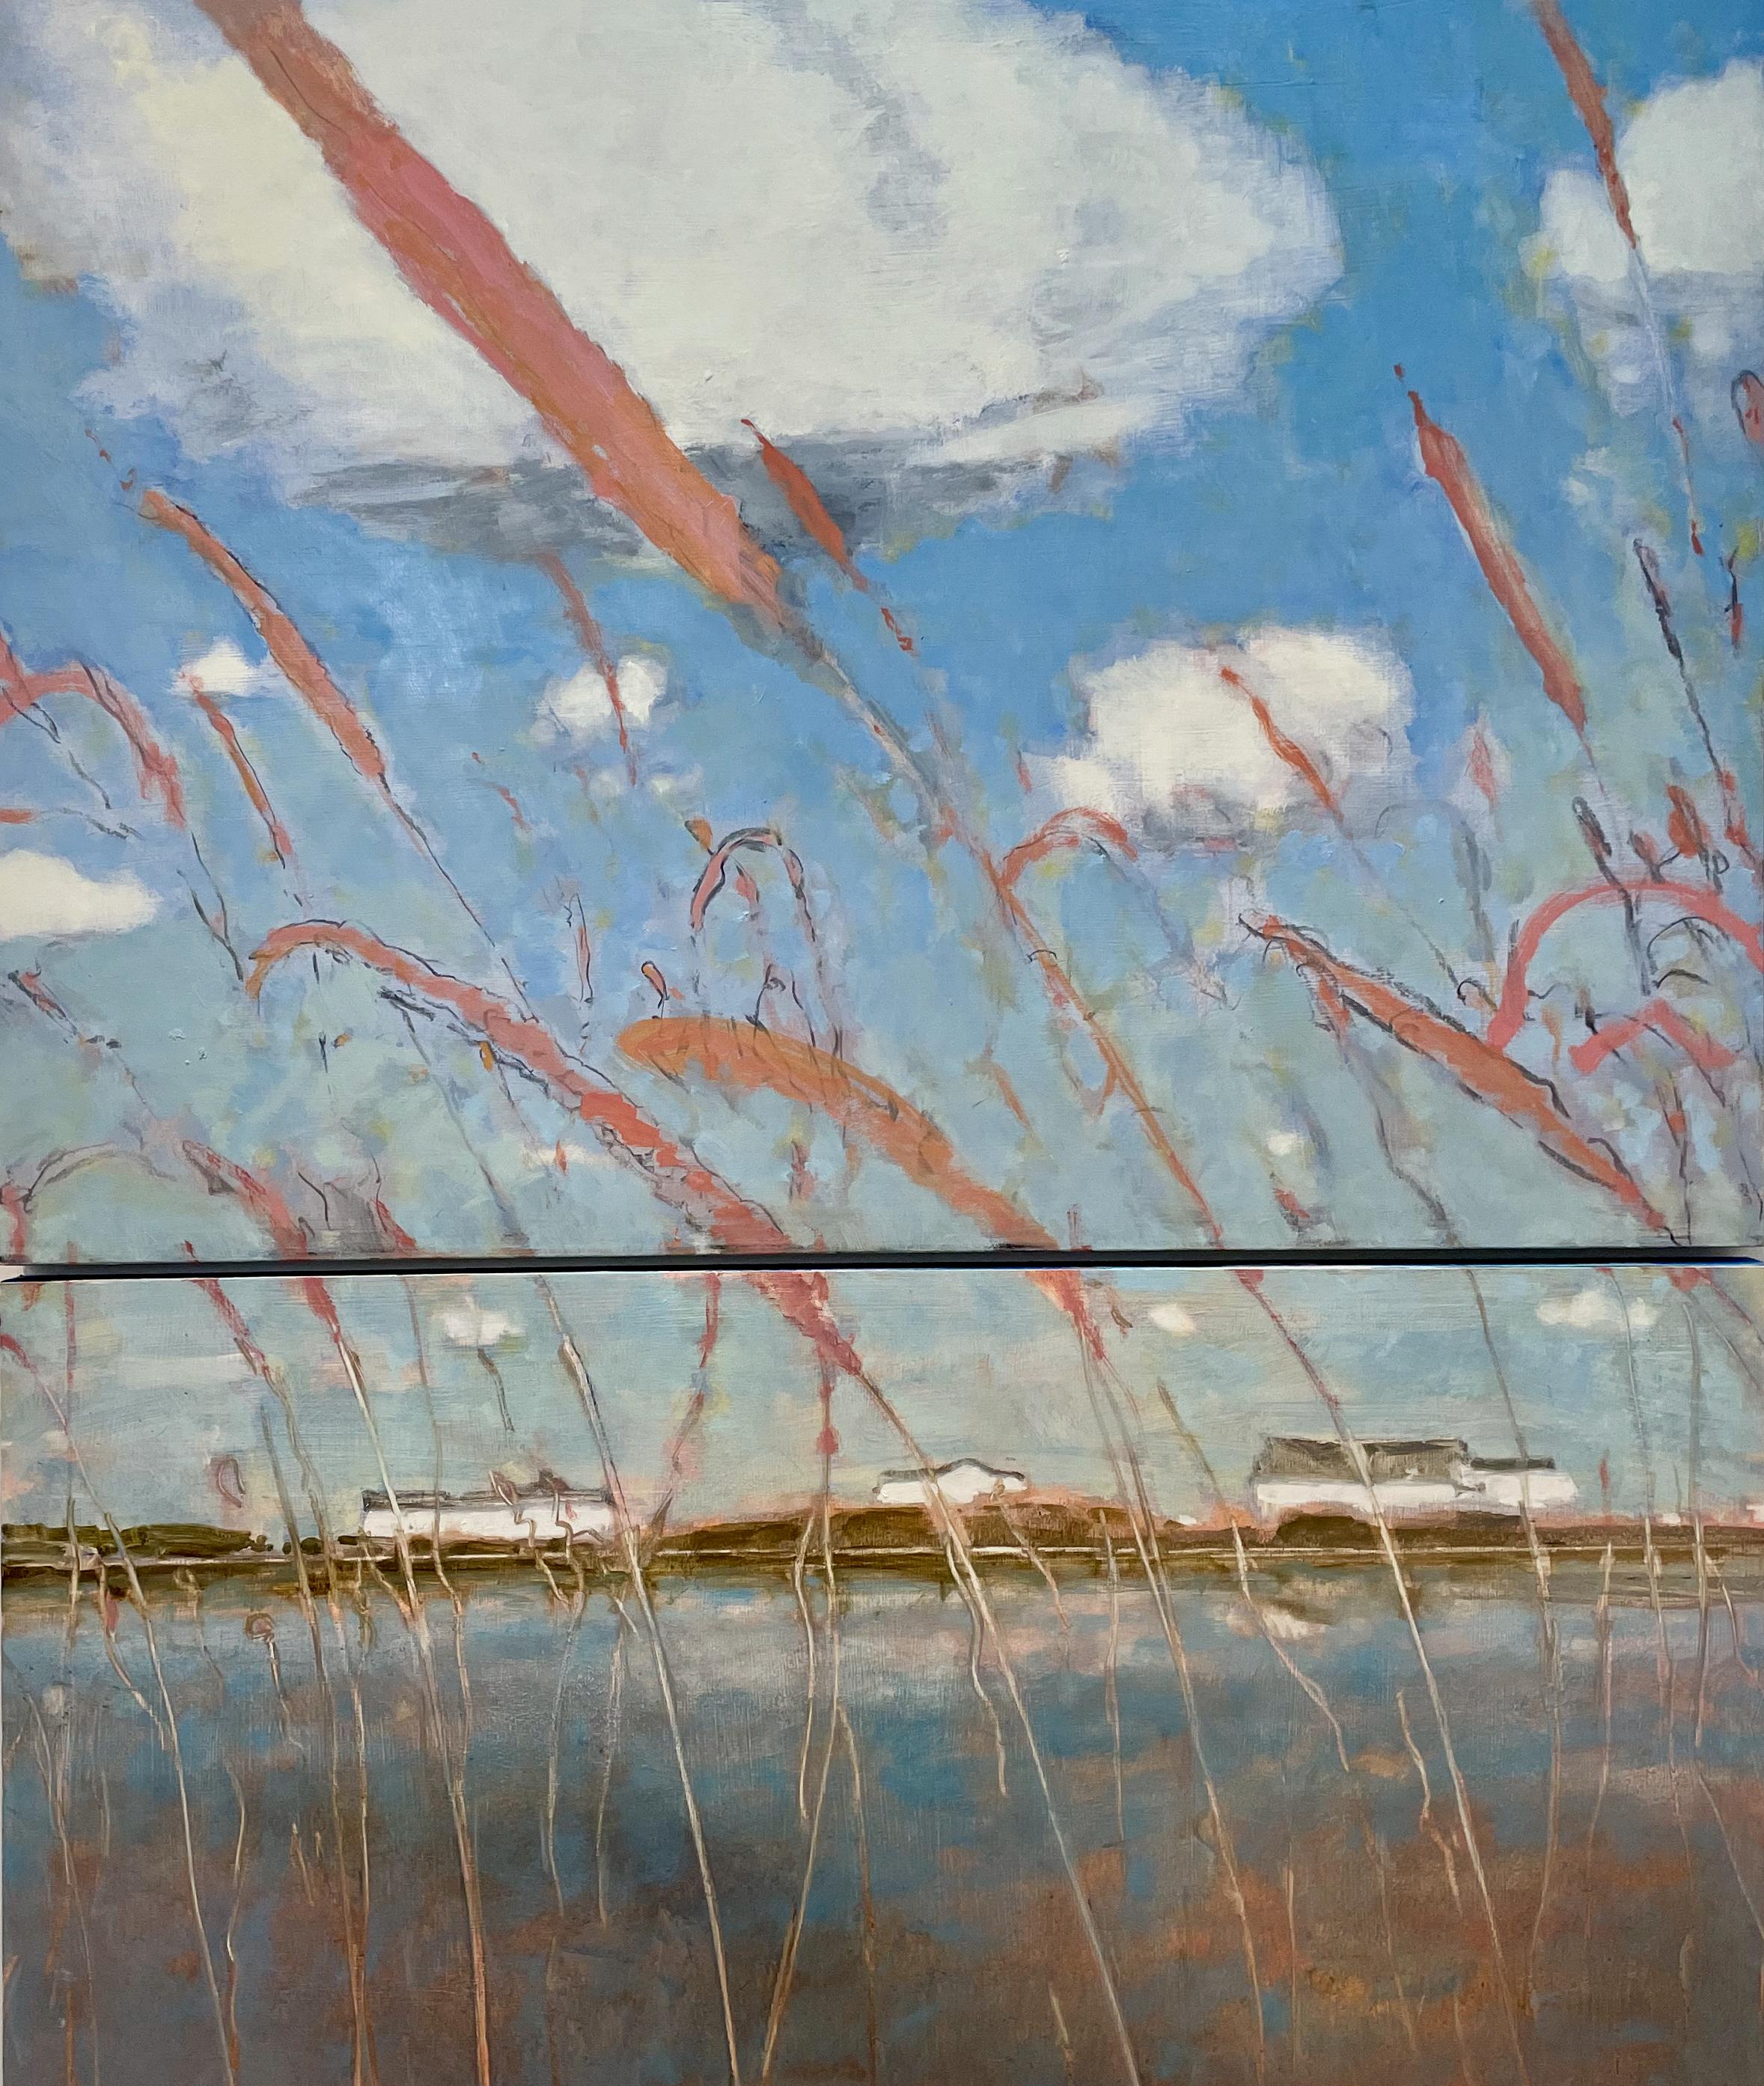 David Konigsberg Landscape Painting - Inlet, Landscape, Pink Wheat Field, Blue Sky, White Clouds Over Water, Houses